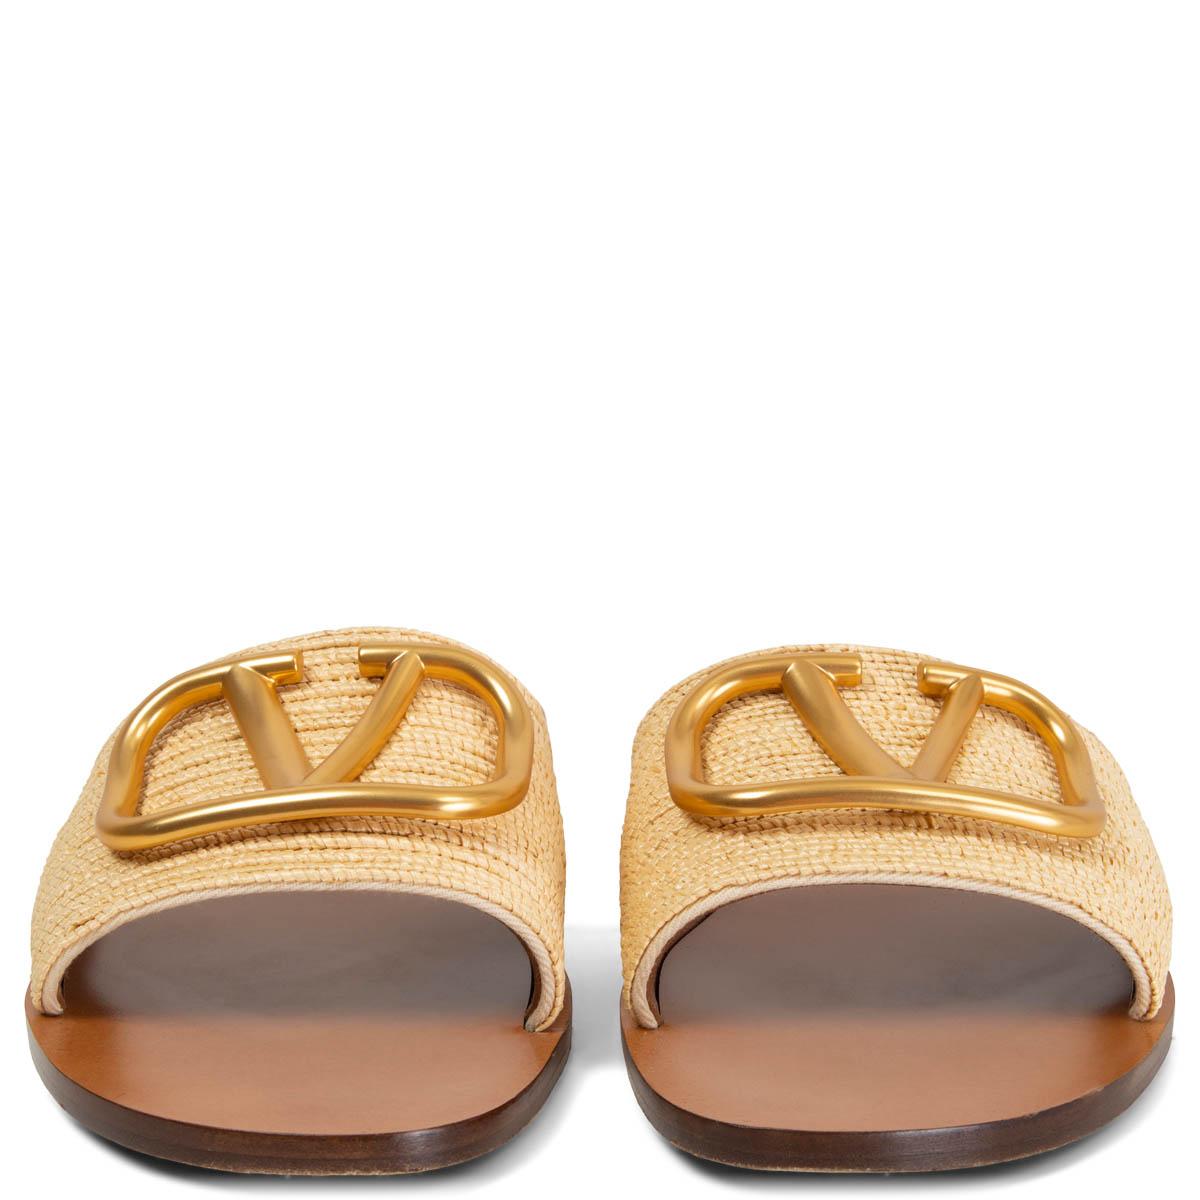 100% authentic Valentino VLOGO slides in beige raffia are topped with the label's 'VLOGO' plaque in gold-tone, which is burnished for an antique effect. Have been worn and are in excellent condition. 

Measurements
Imprinted Size	37.5
Shoe